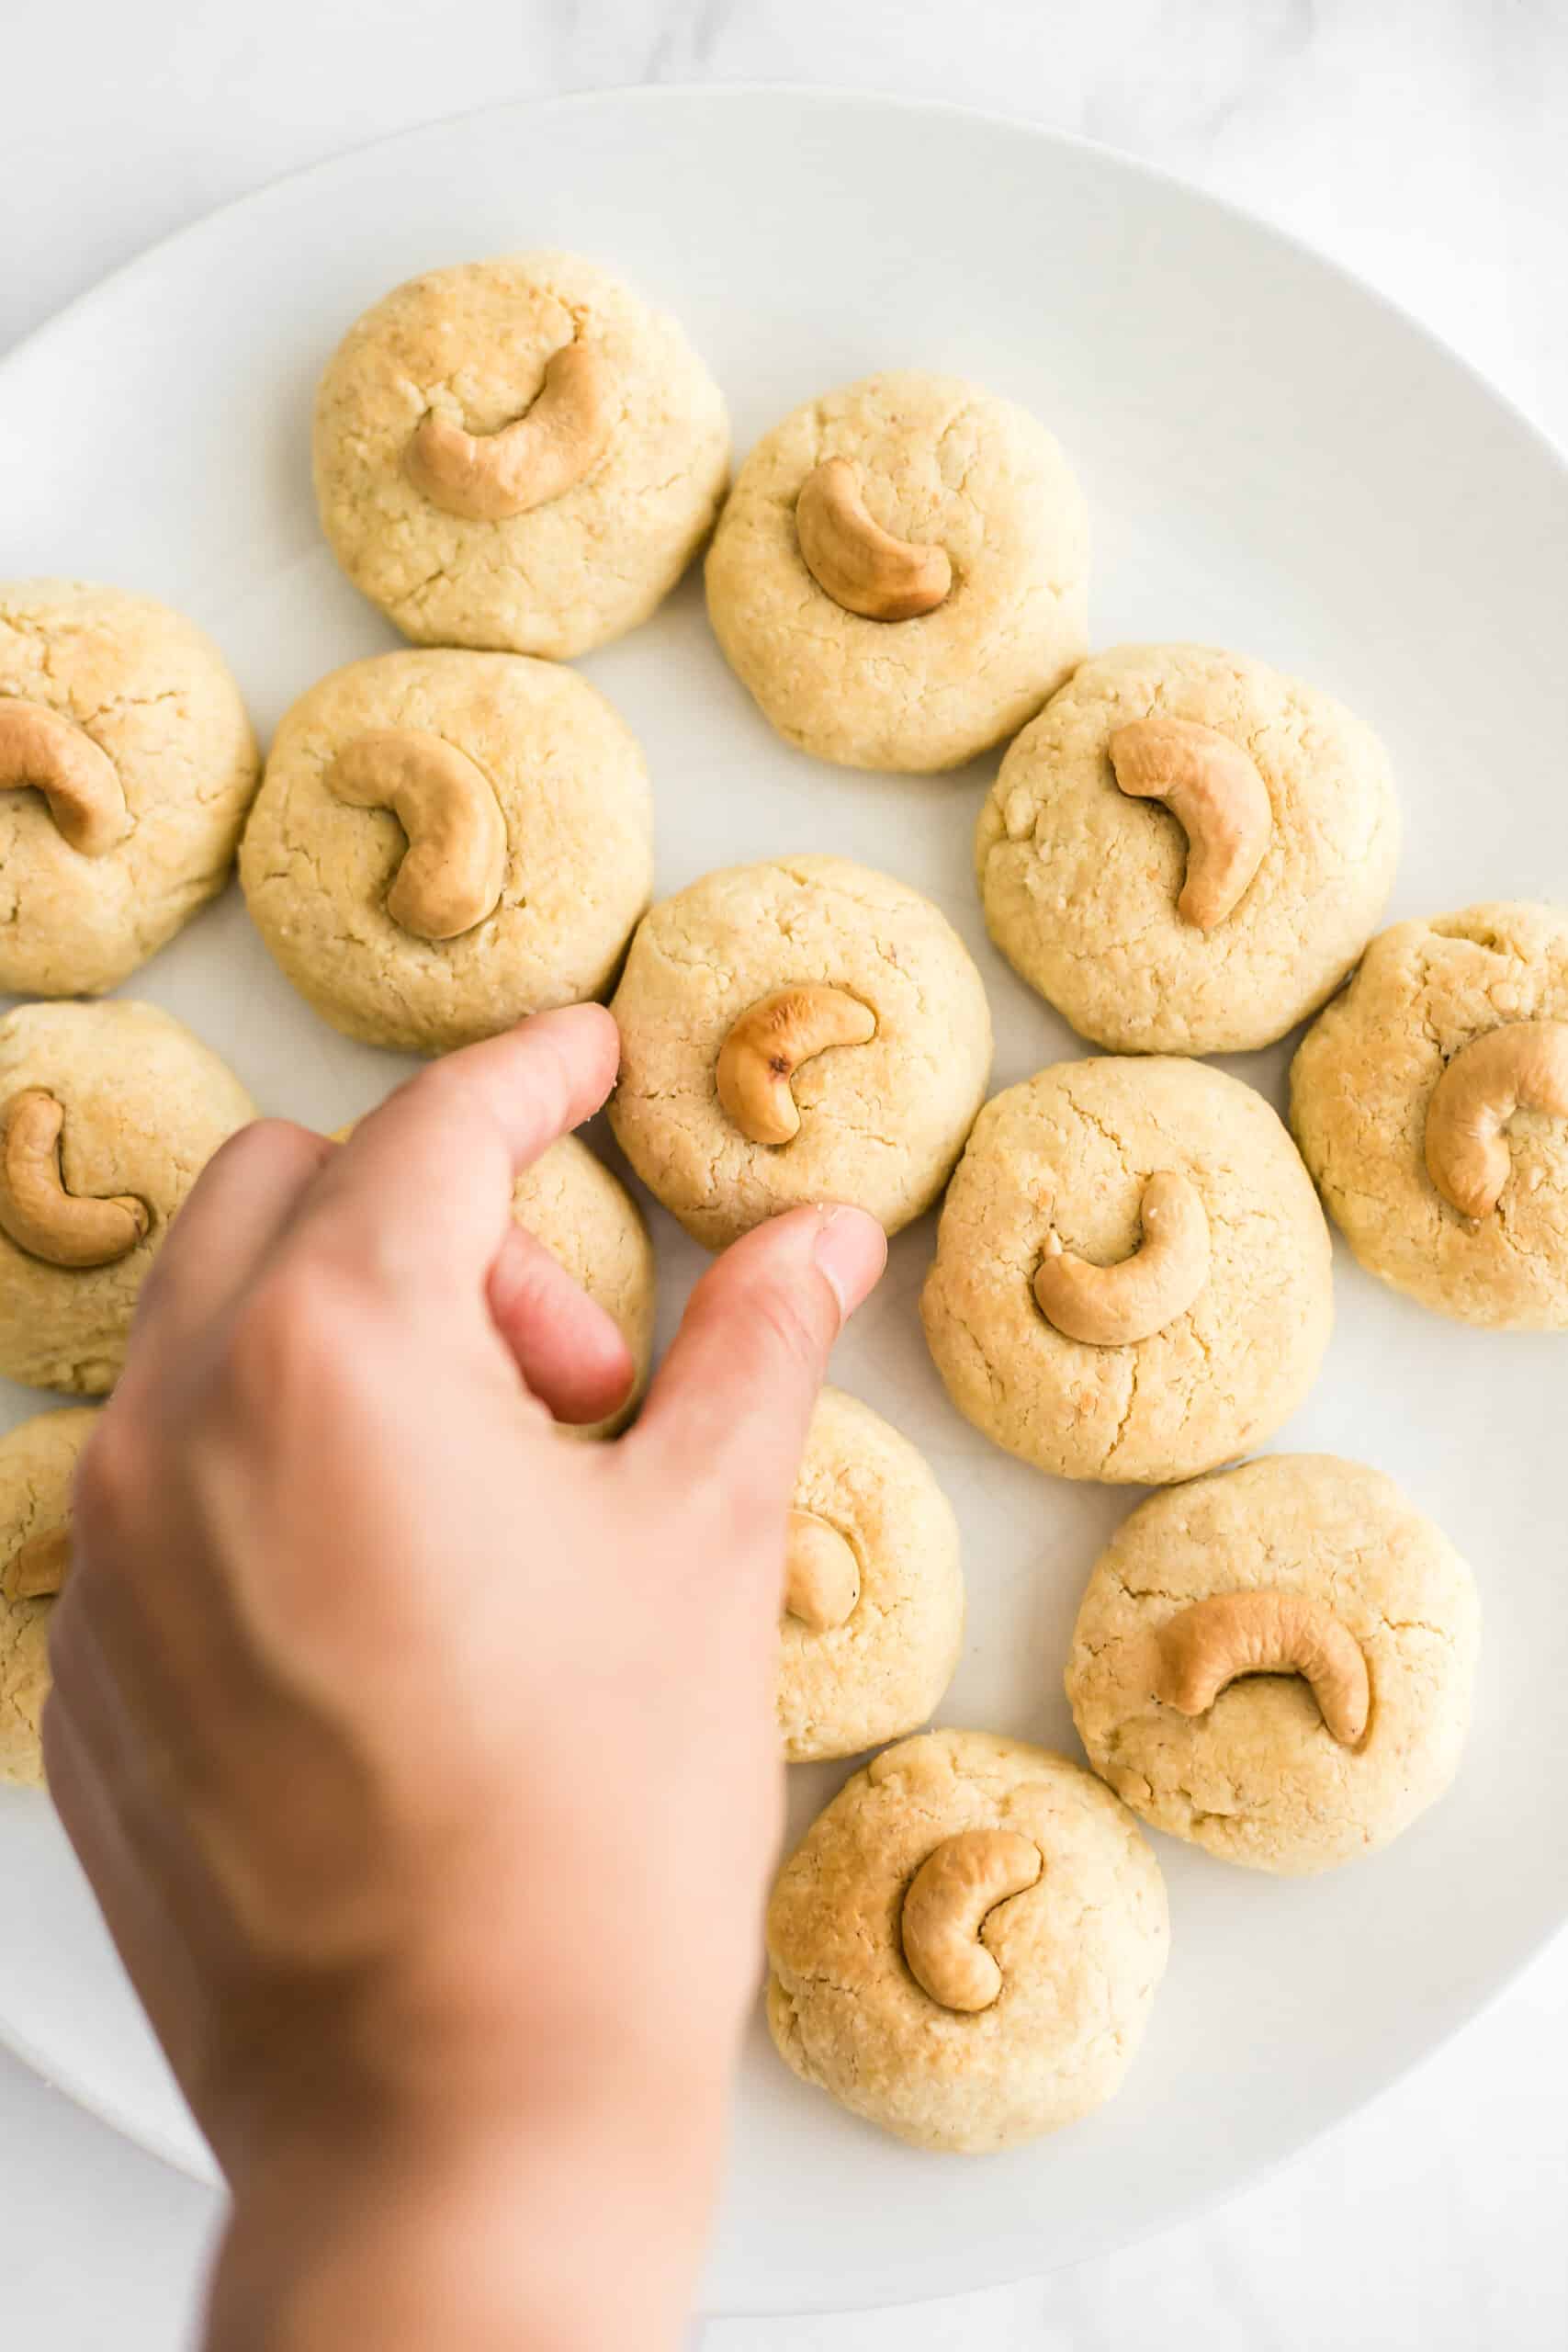 Hand reaching for a gluten-free cashew nut cookie.